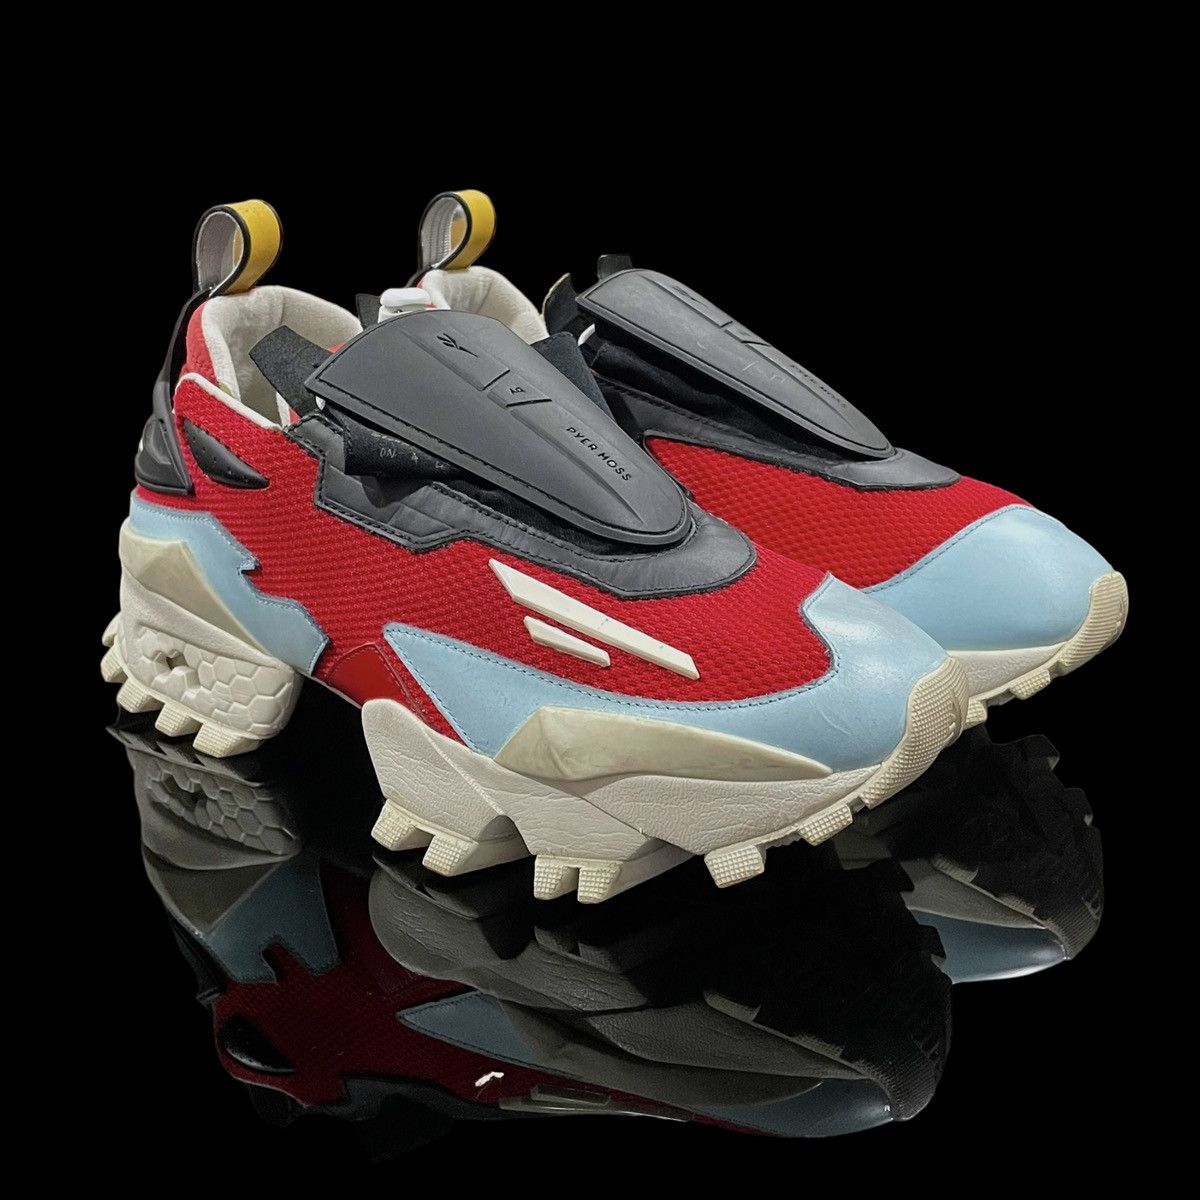 Reebok Experiment 4 - Trail Fury - “Glory” - 💥Lowest on Grailed💥 | Grailed